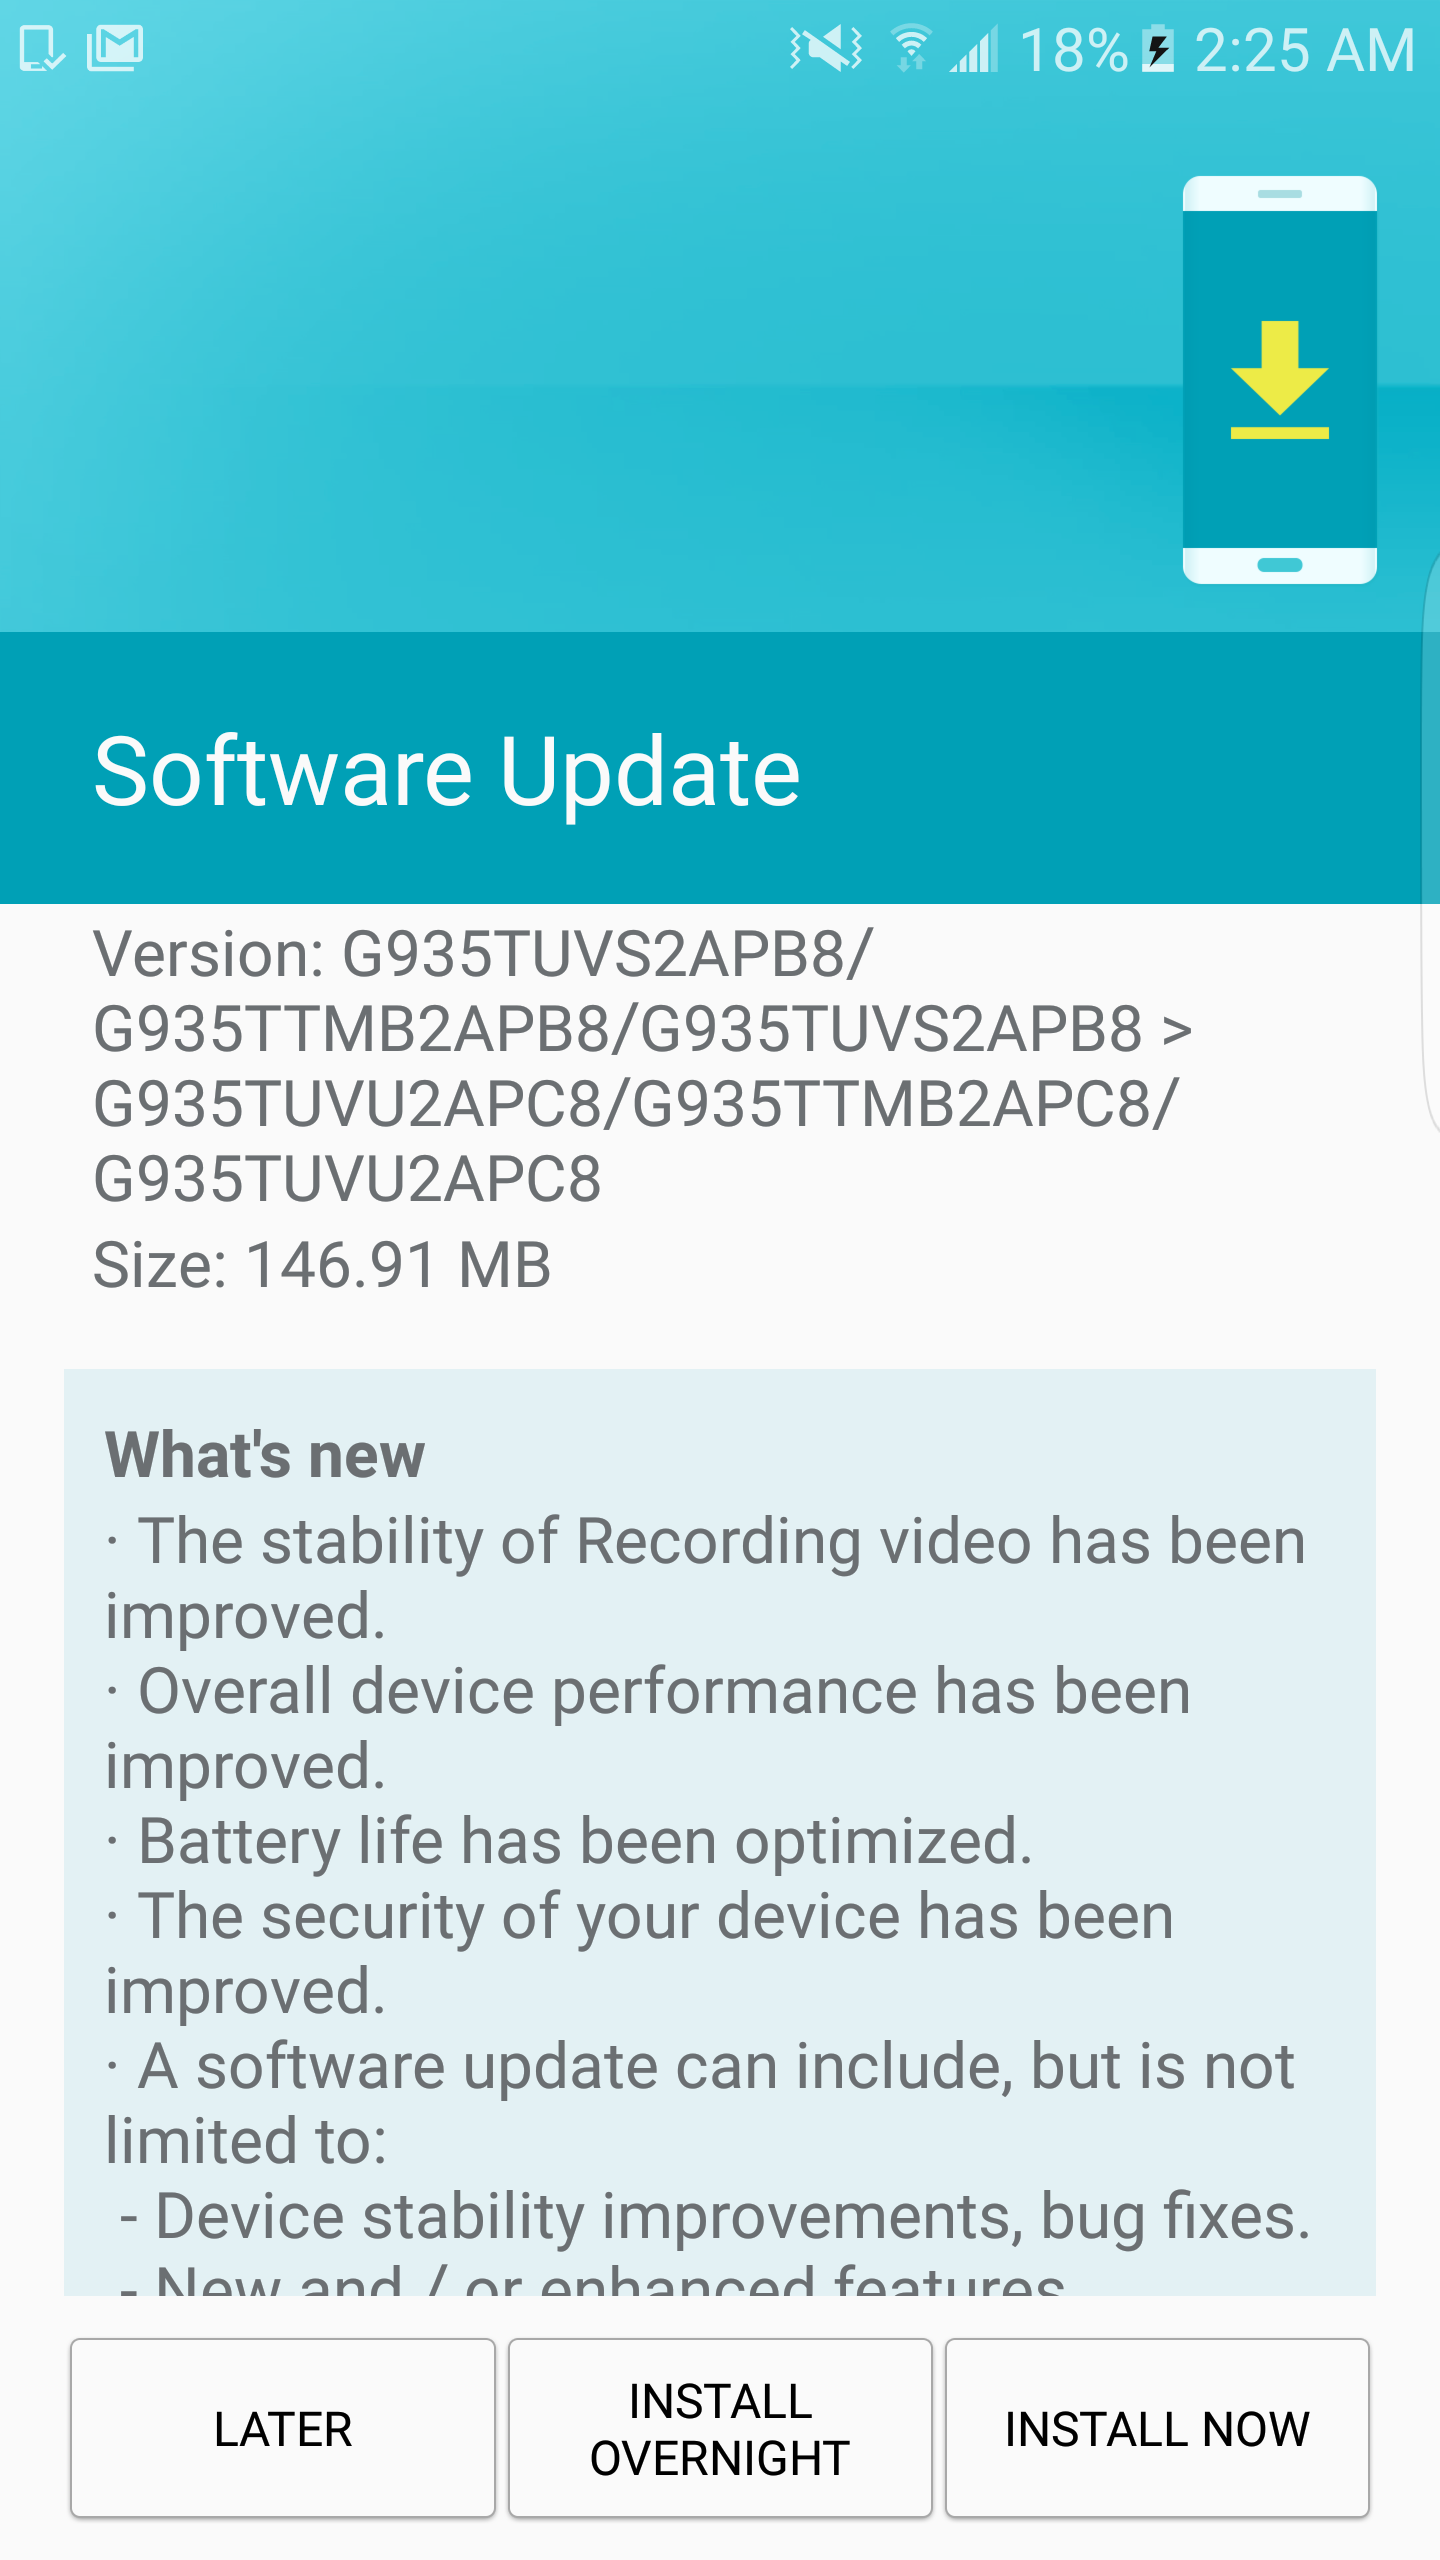 Galaxy S7 on T-Mobile software update